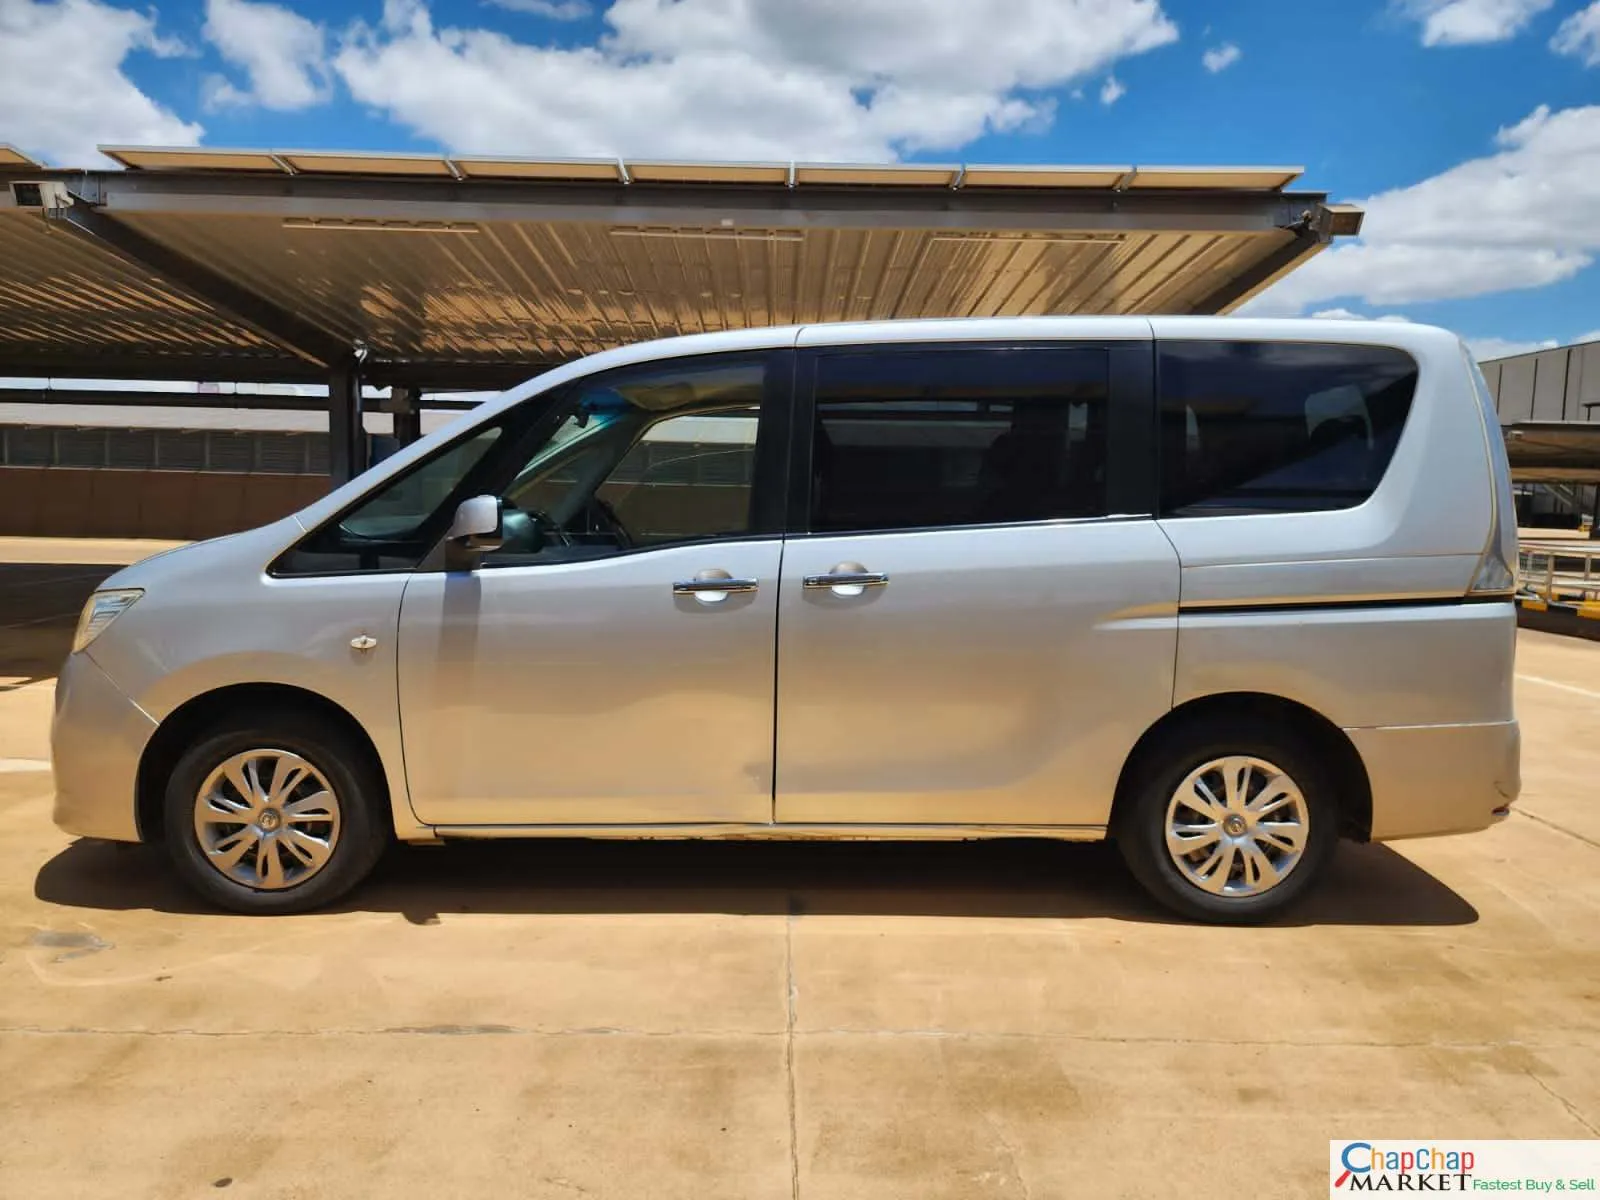 Cars Cars For Sale-Nissan Serena Van QUICK SALE You Pay 30% Deposit Trade in Ok exclusive Nissan Serena for sale in kenya hire purchase installments 9